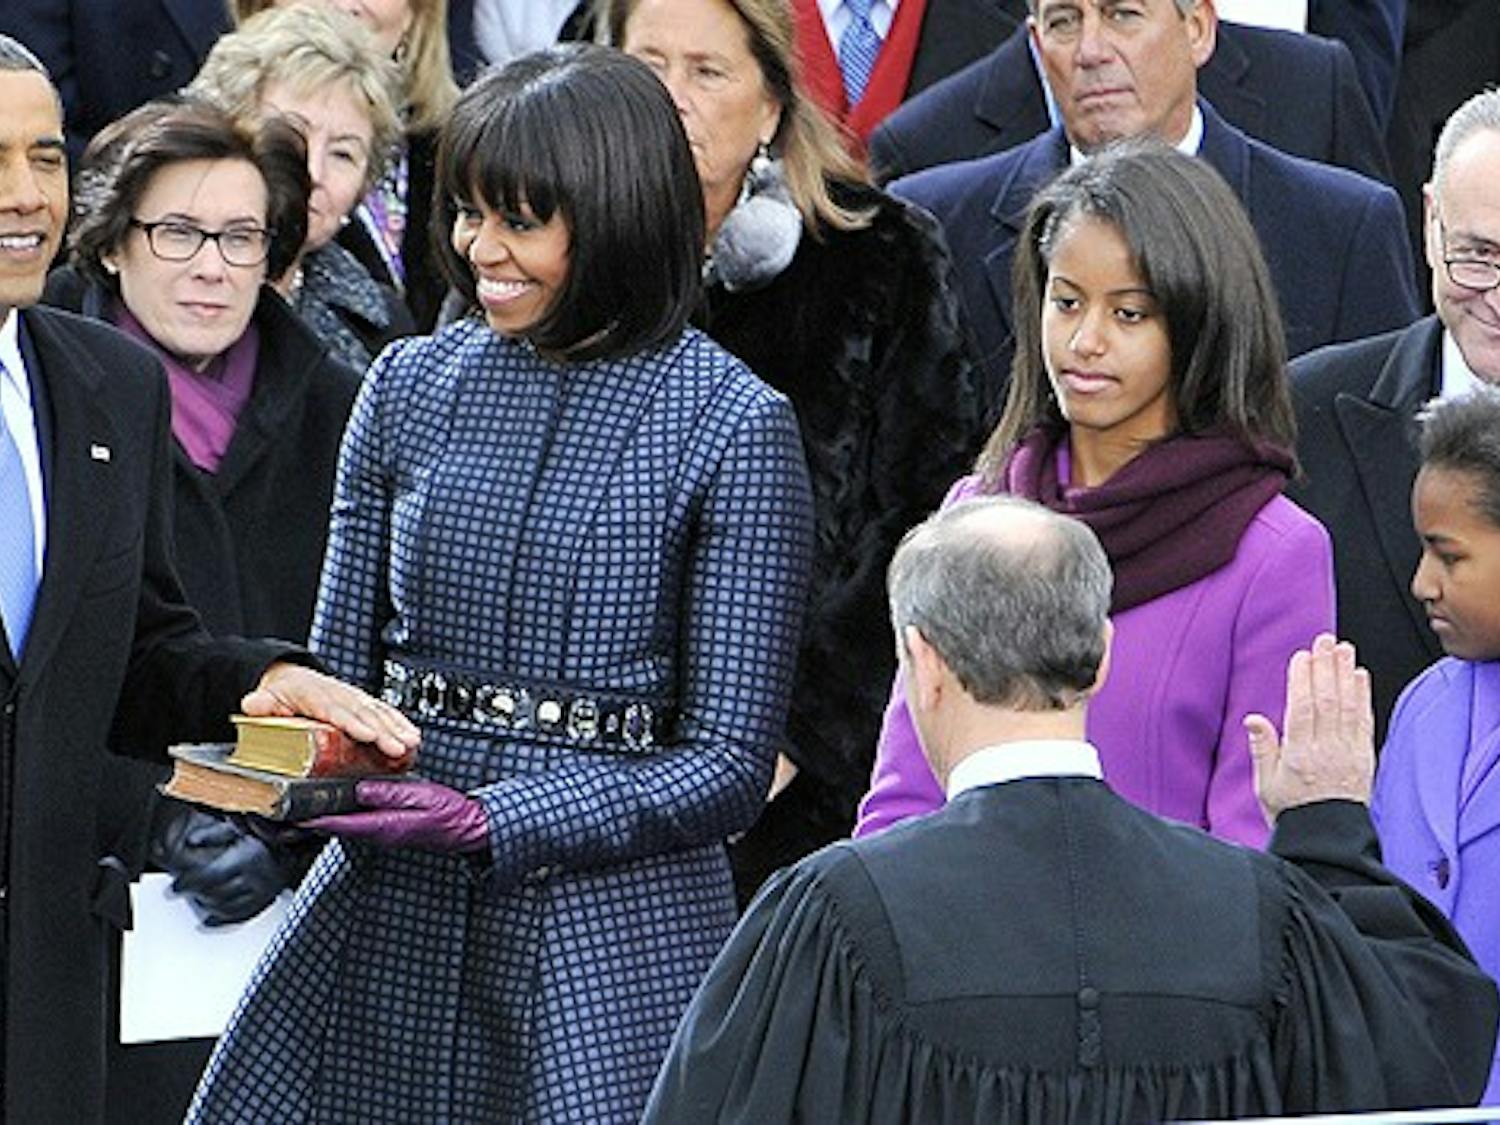 President Barack Obama is sworn-in for a second term as the President of the United States by Supreme Court Chief Justice John Roberts during his public inauguration ceremony at the U.S. Capitol Building in Washington, D.C. on January 21, 2013. The first family looks on. (Mark Gail/MCT)